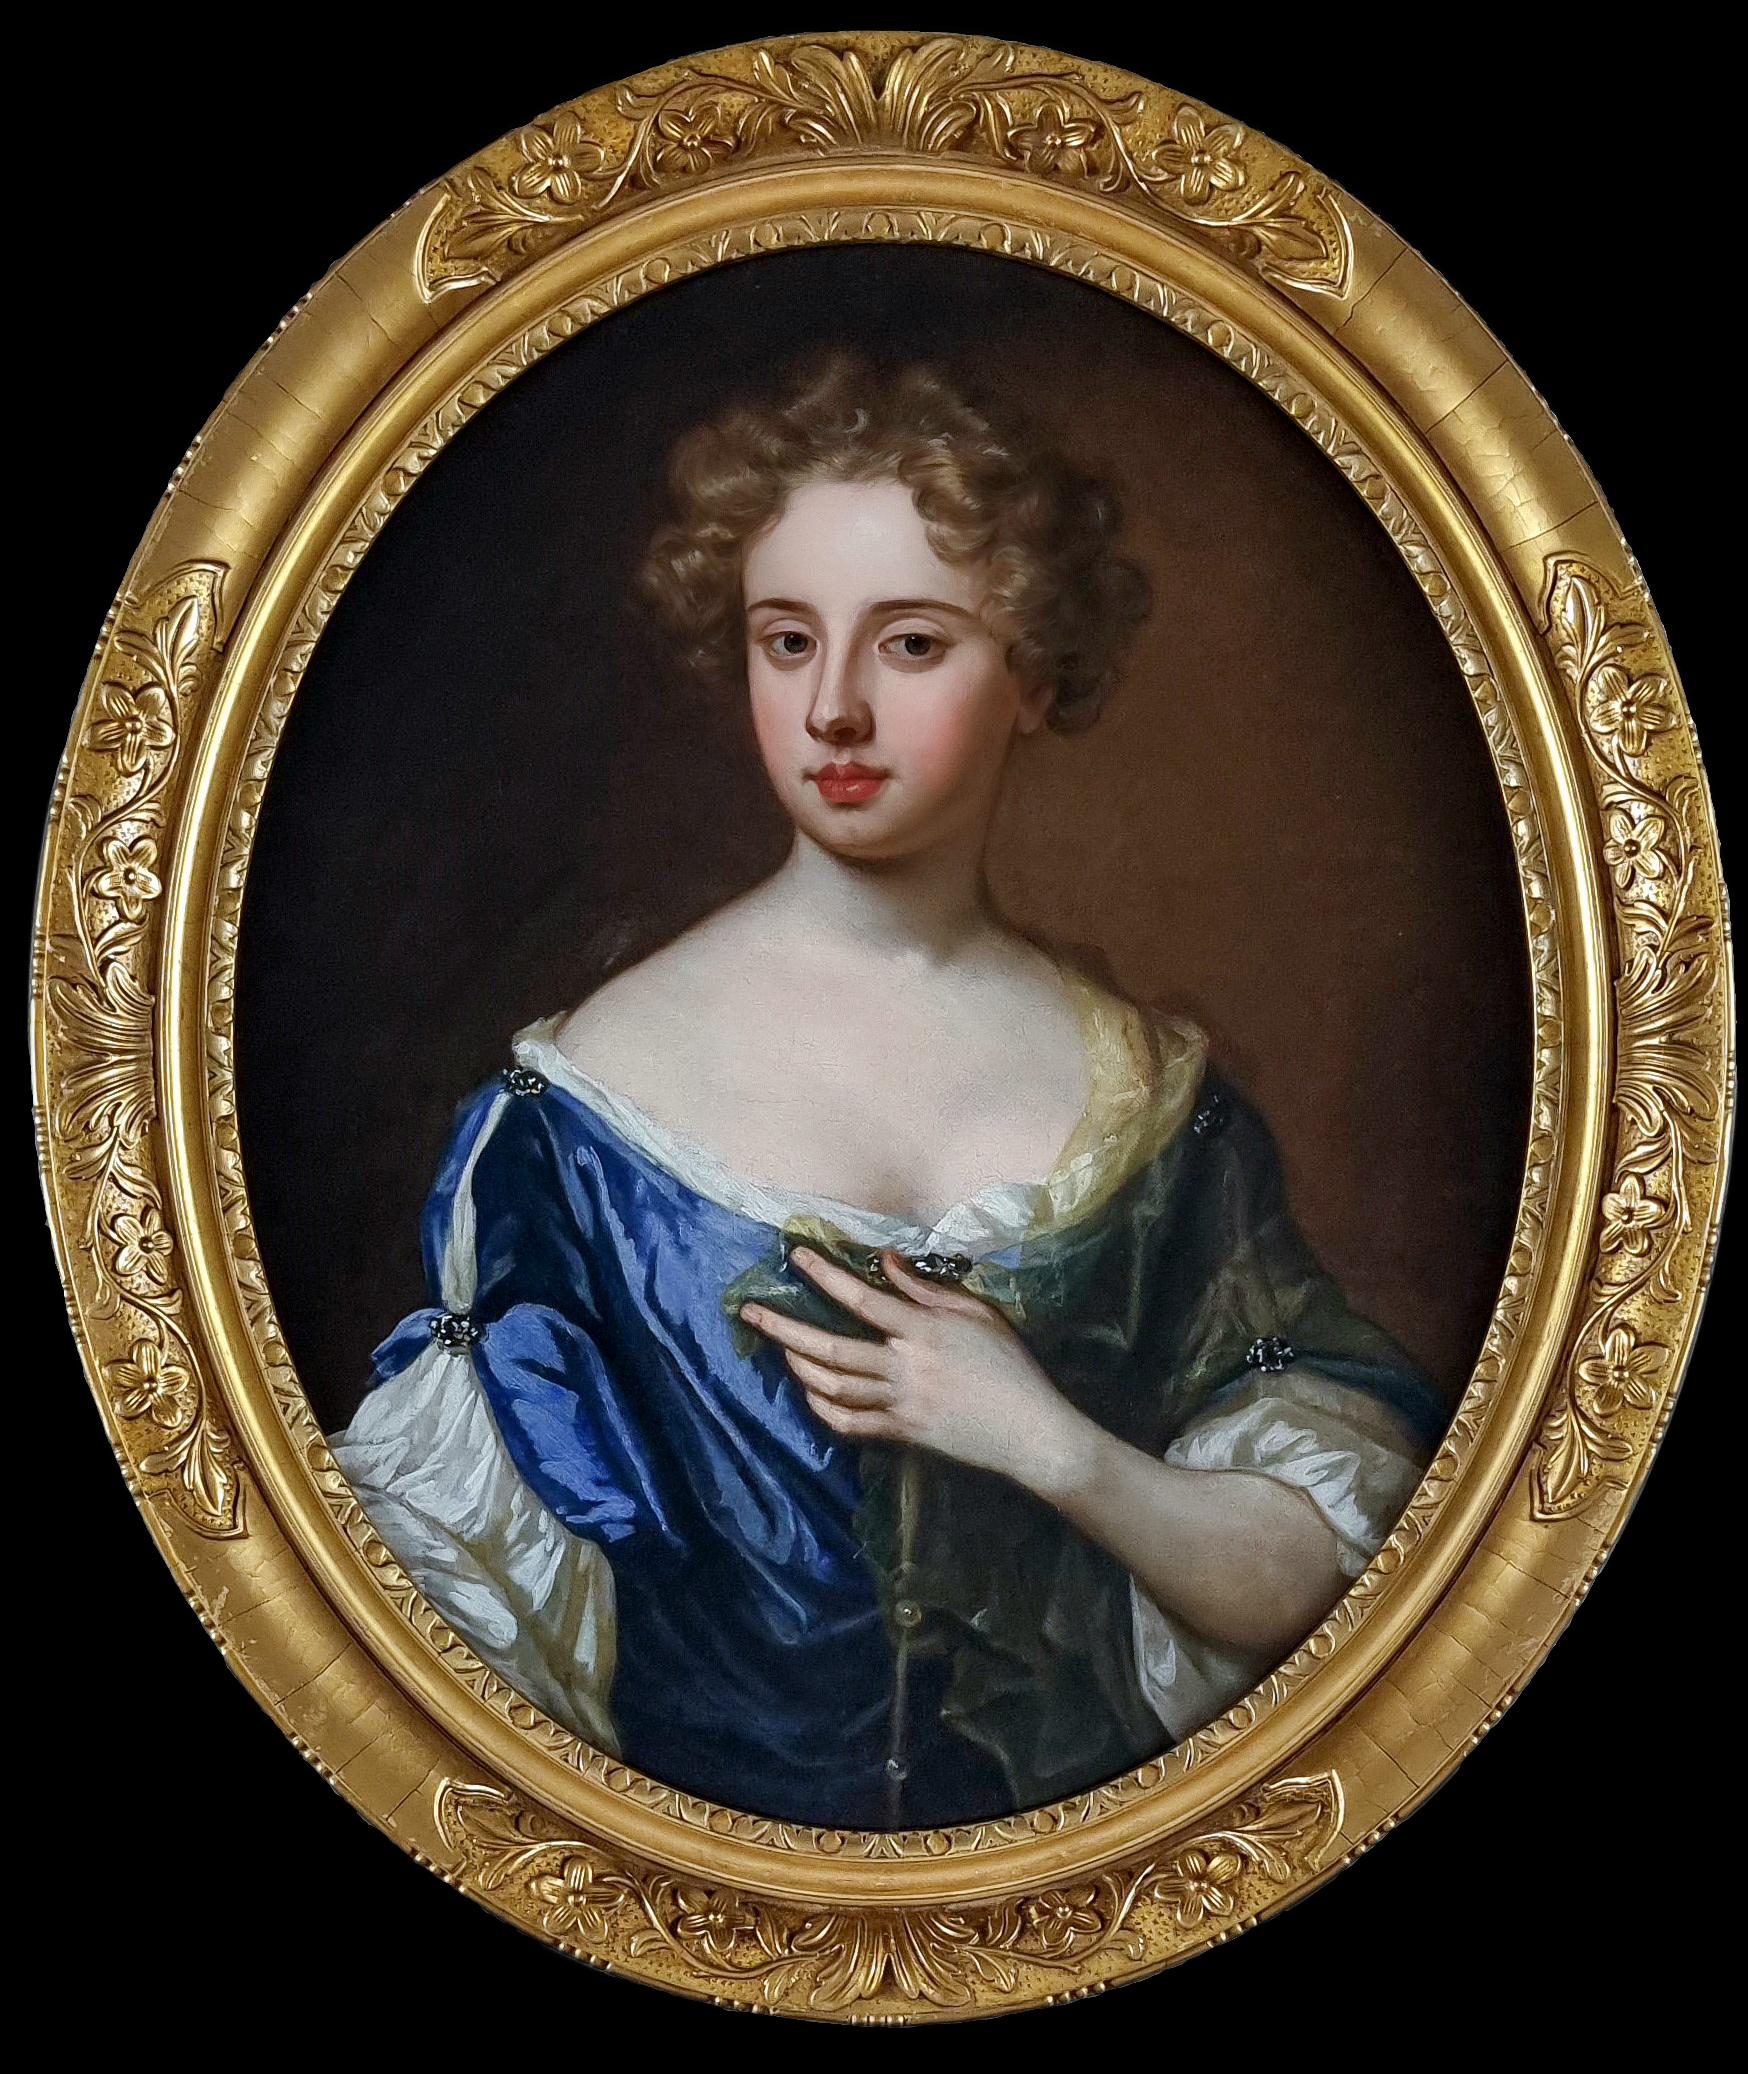 Portrait of a Lady in a Blue Gown Holding a Sheer Scarf c.1675-85, Oil on canvas